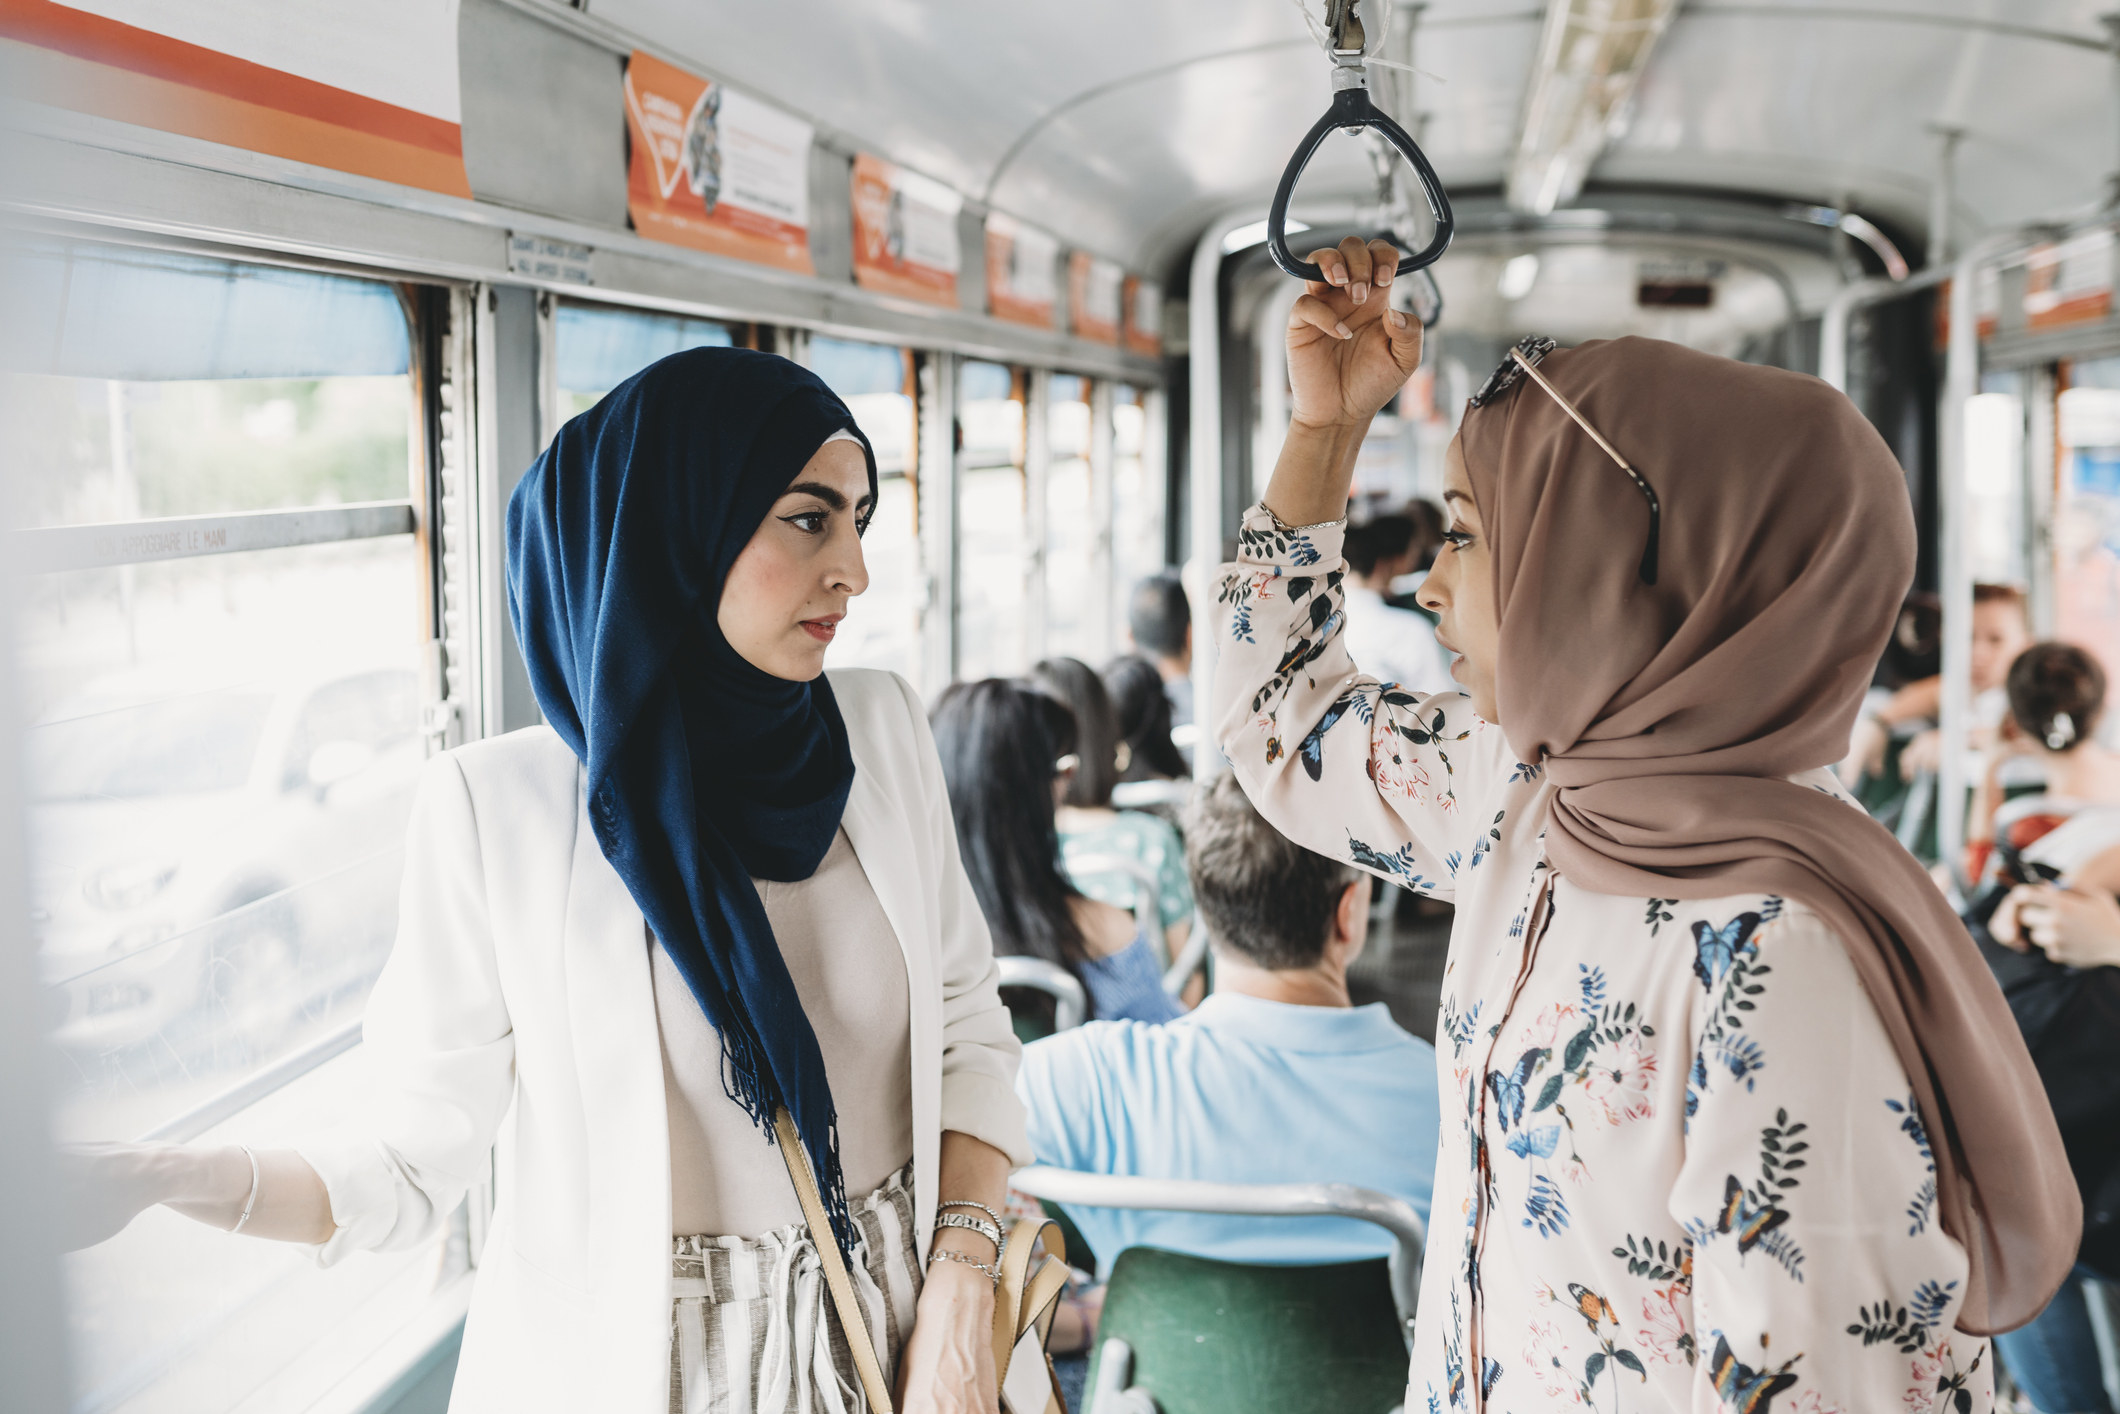 Two Muslim women talking to each other on a bus